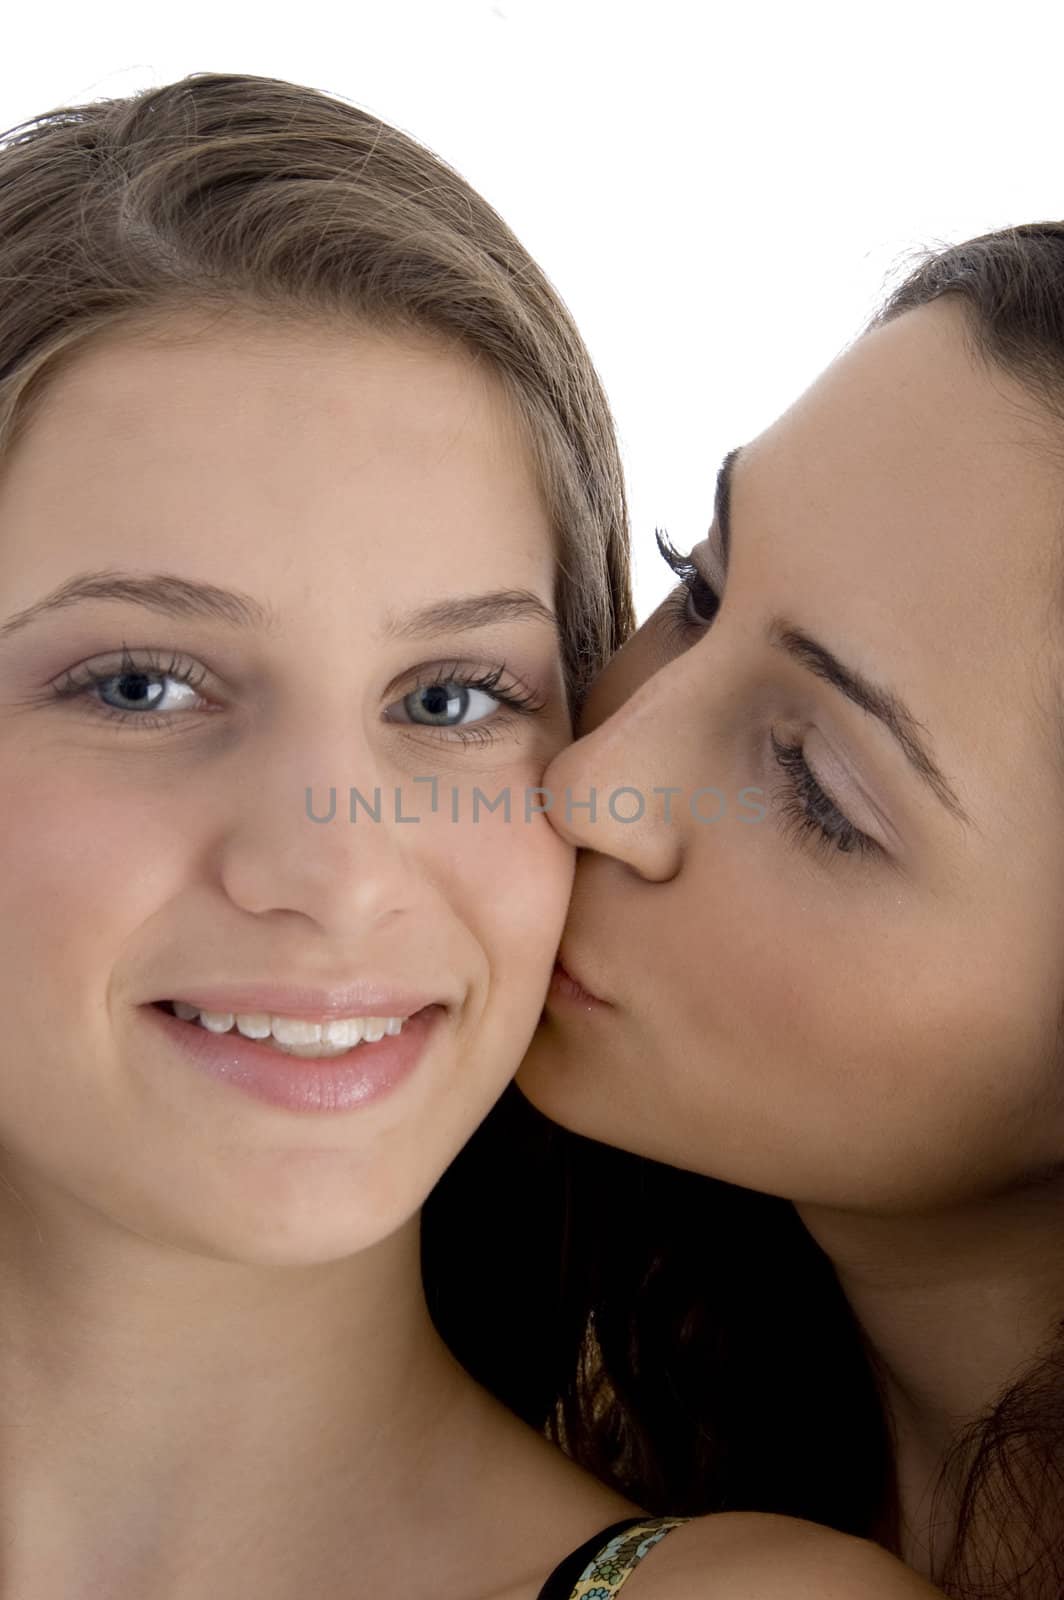 female kissing her friend on an isolated white background